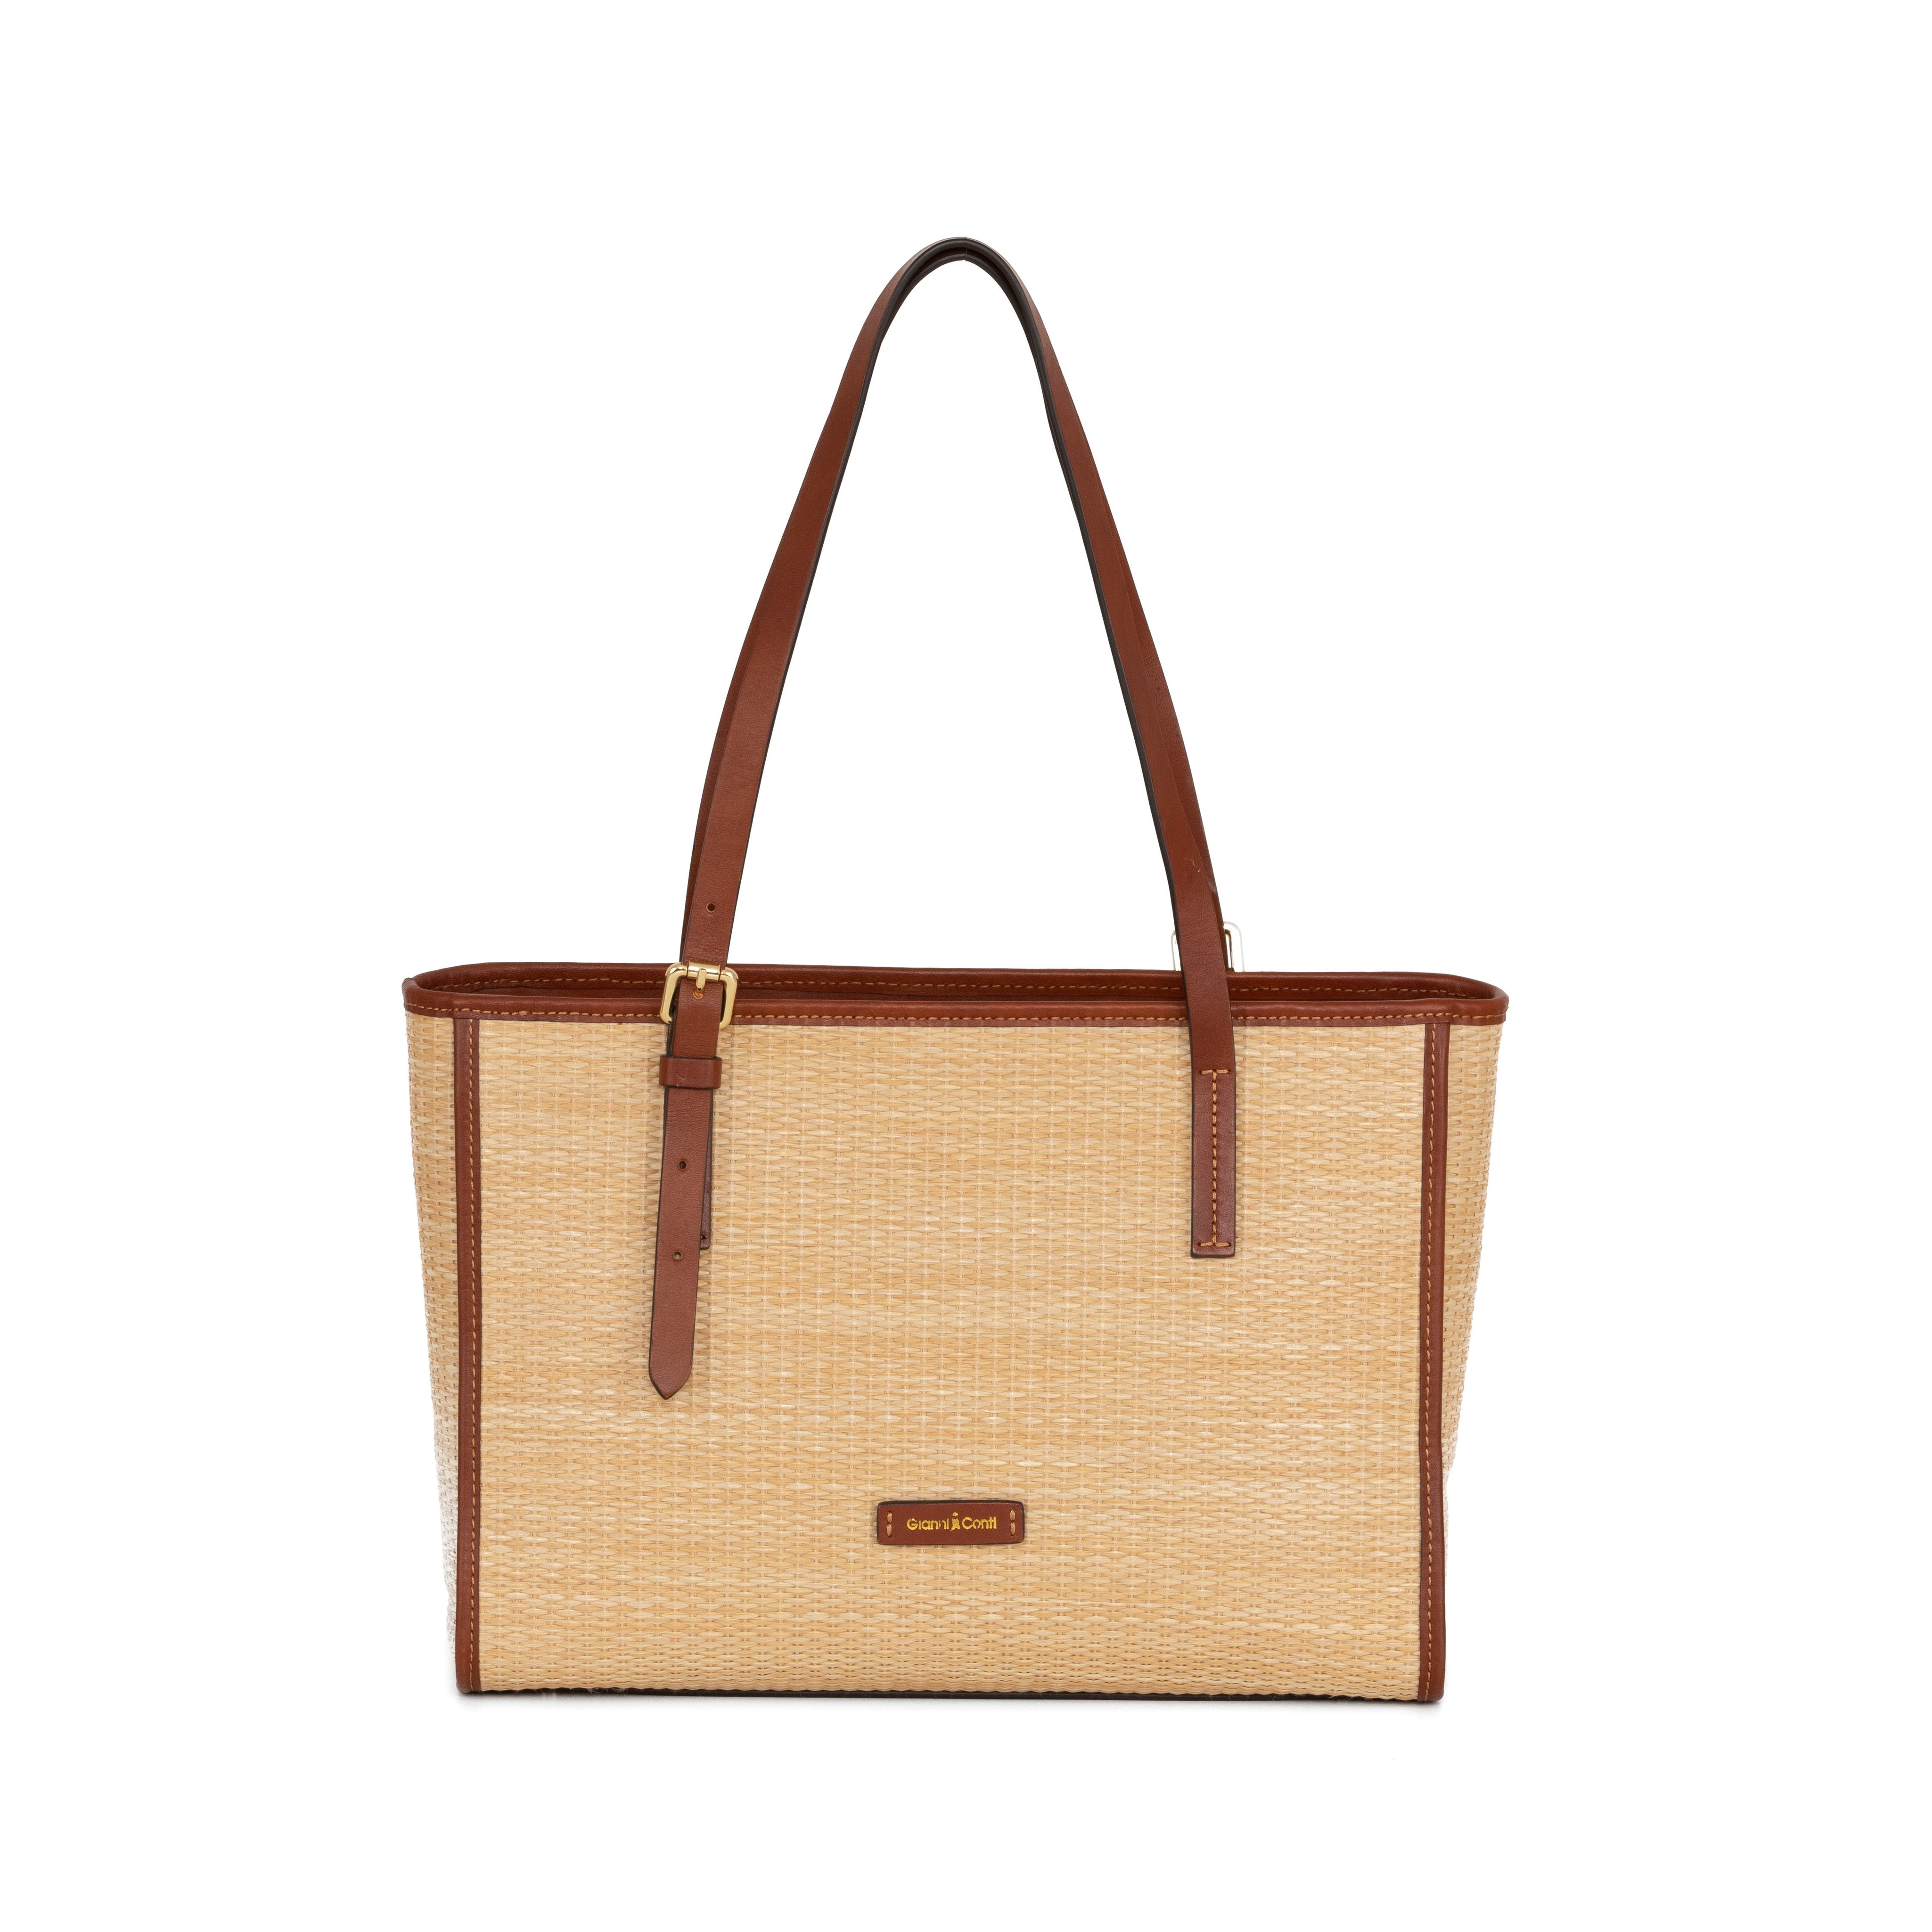 Gianni Conti SAMMY Tote - Vegetable-Tanned Leather